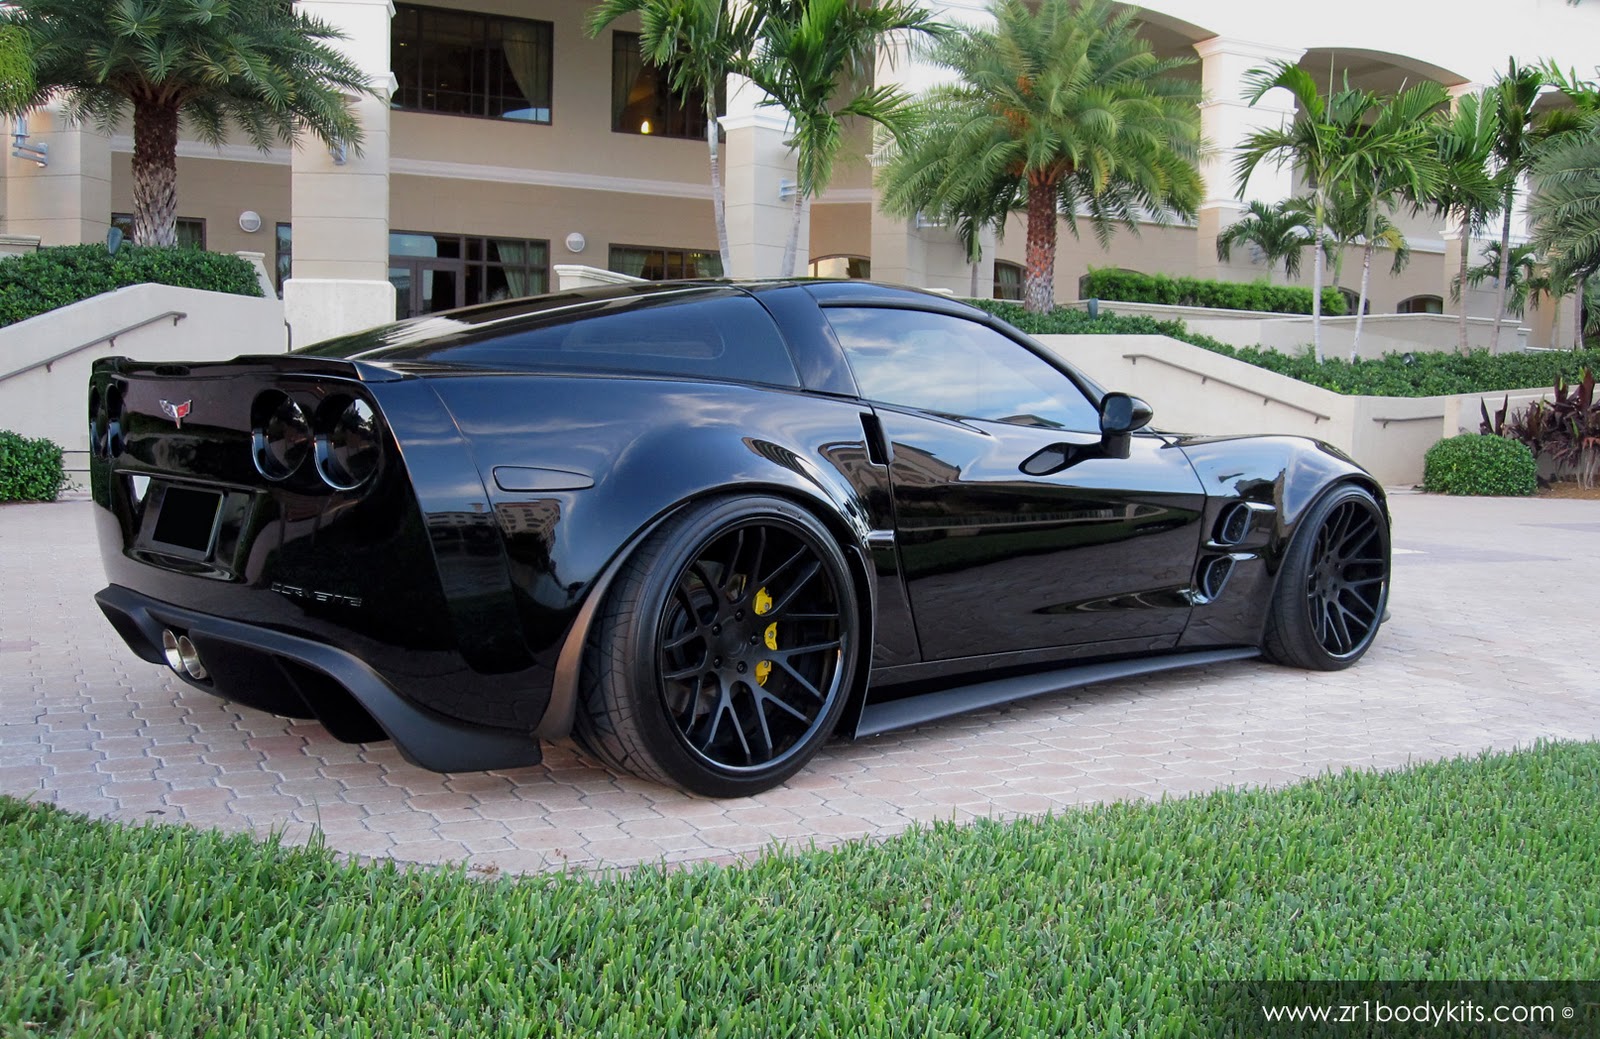 Cool Chevrolet Corvette with extreme car body kit   Cool Cars and